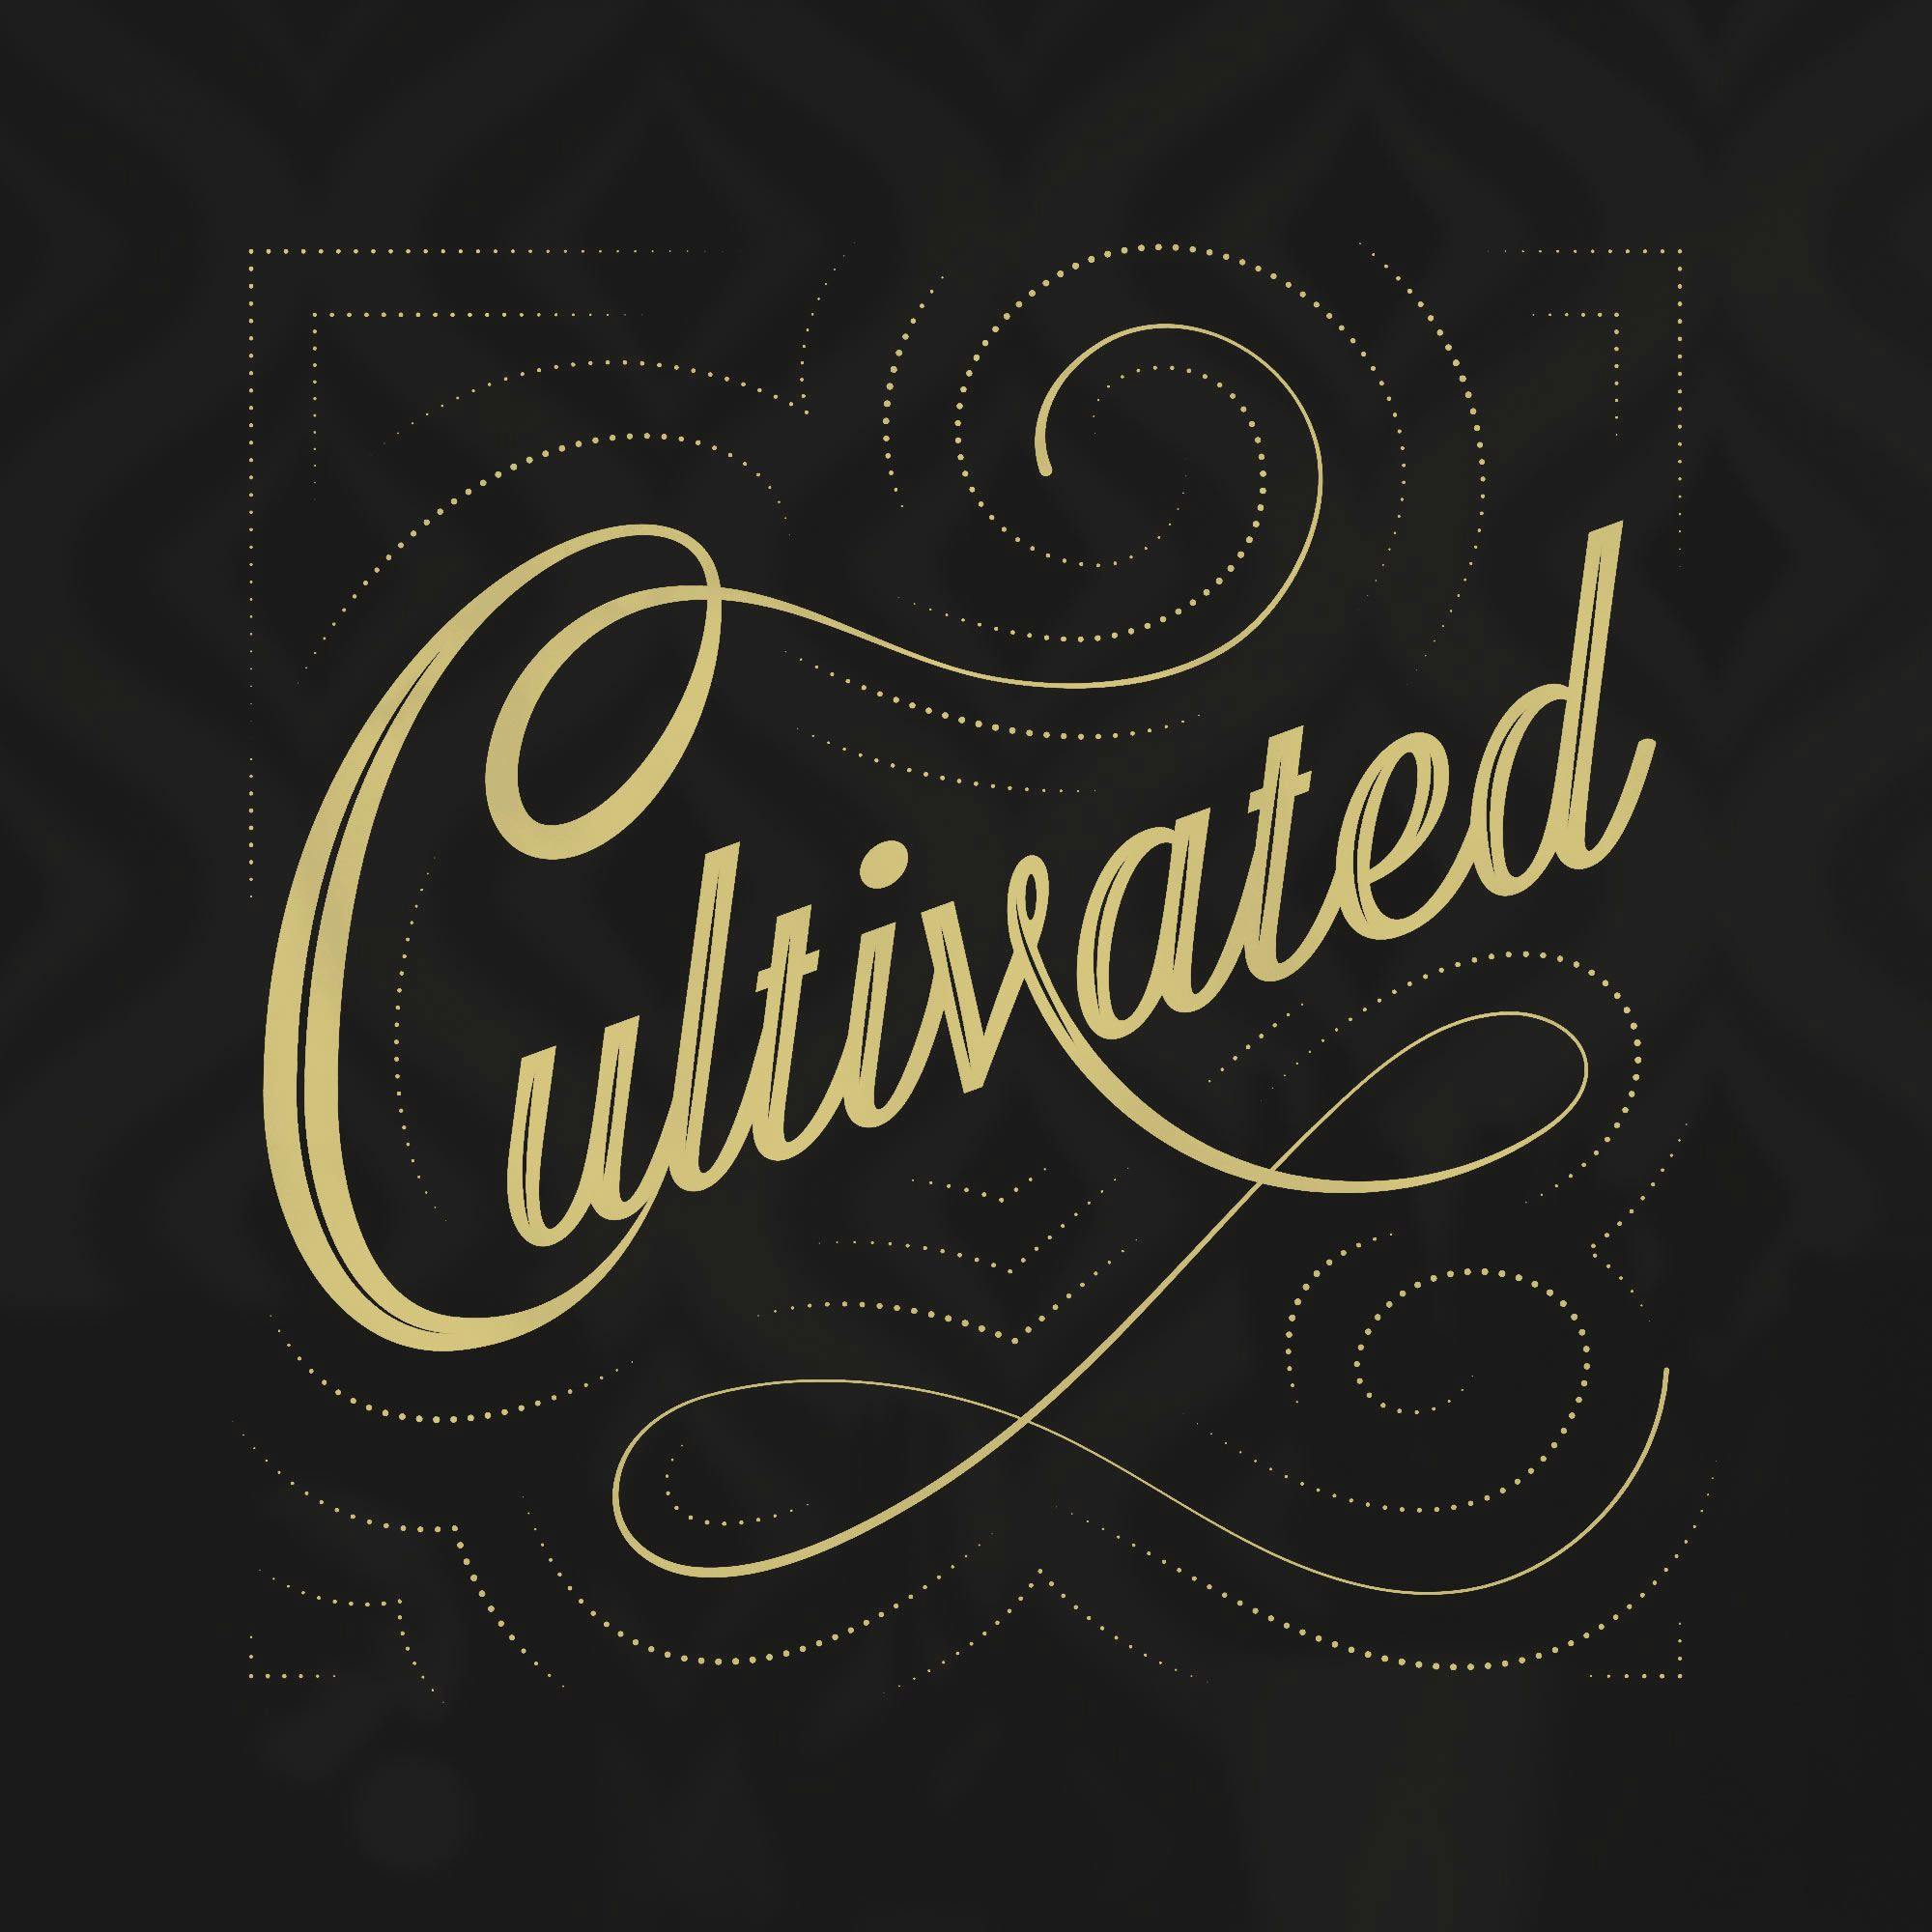 Cultivated: A podcast about faith and work